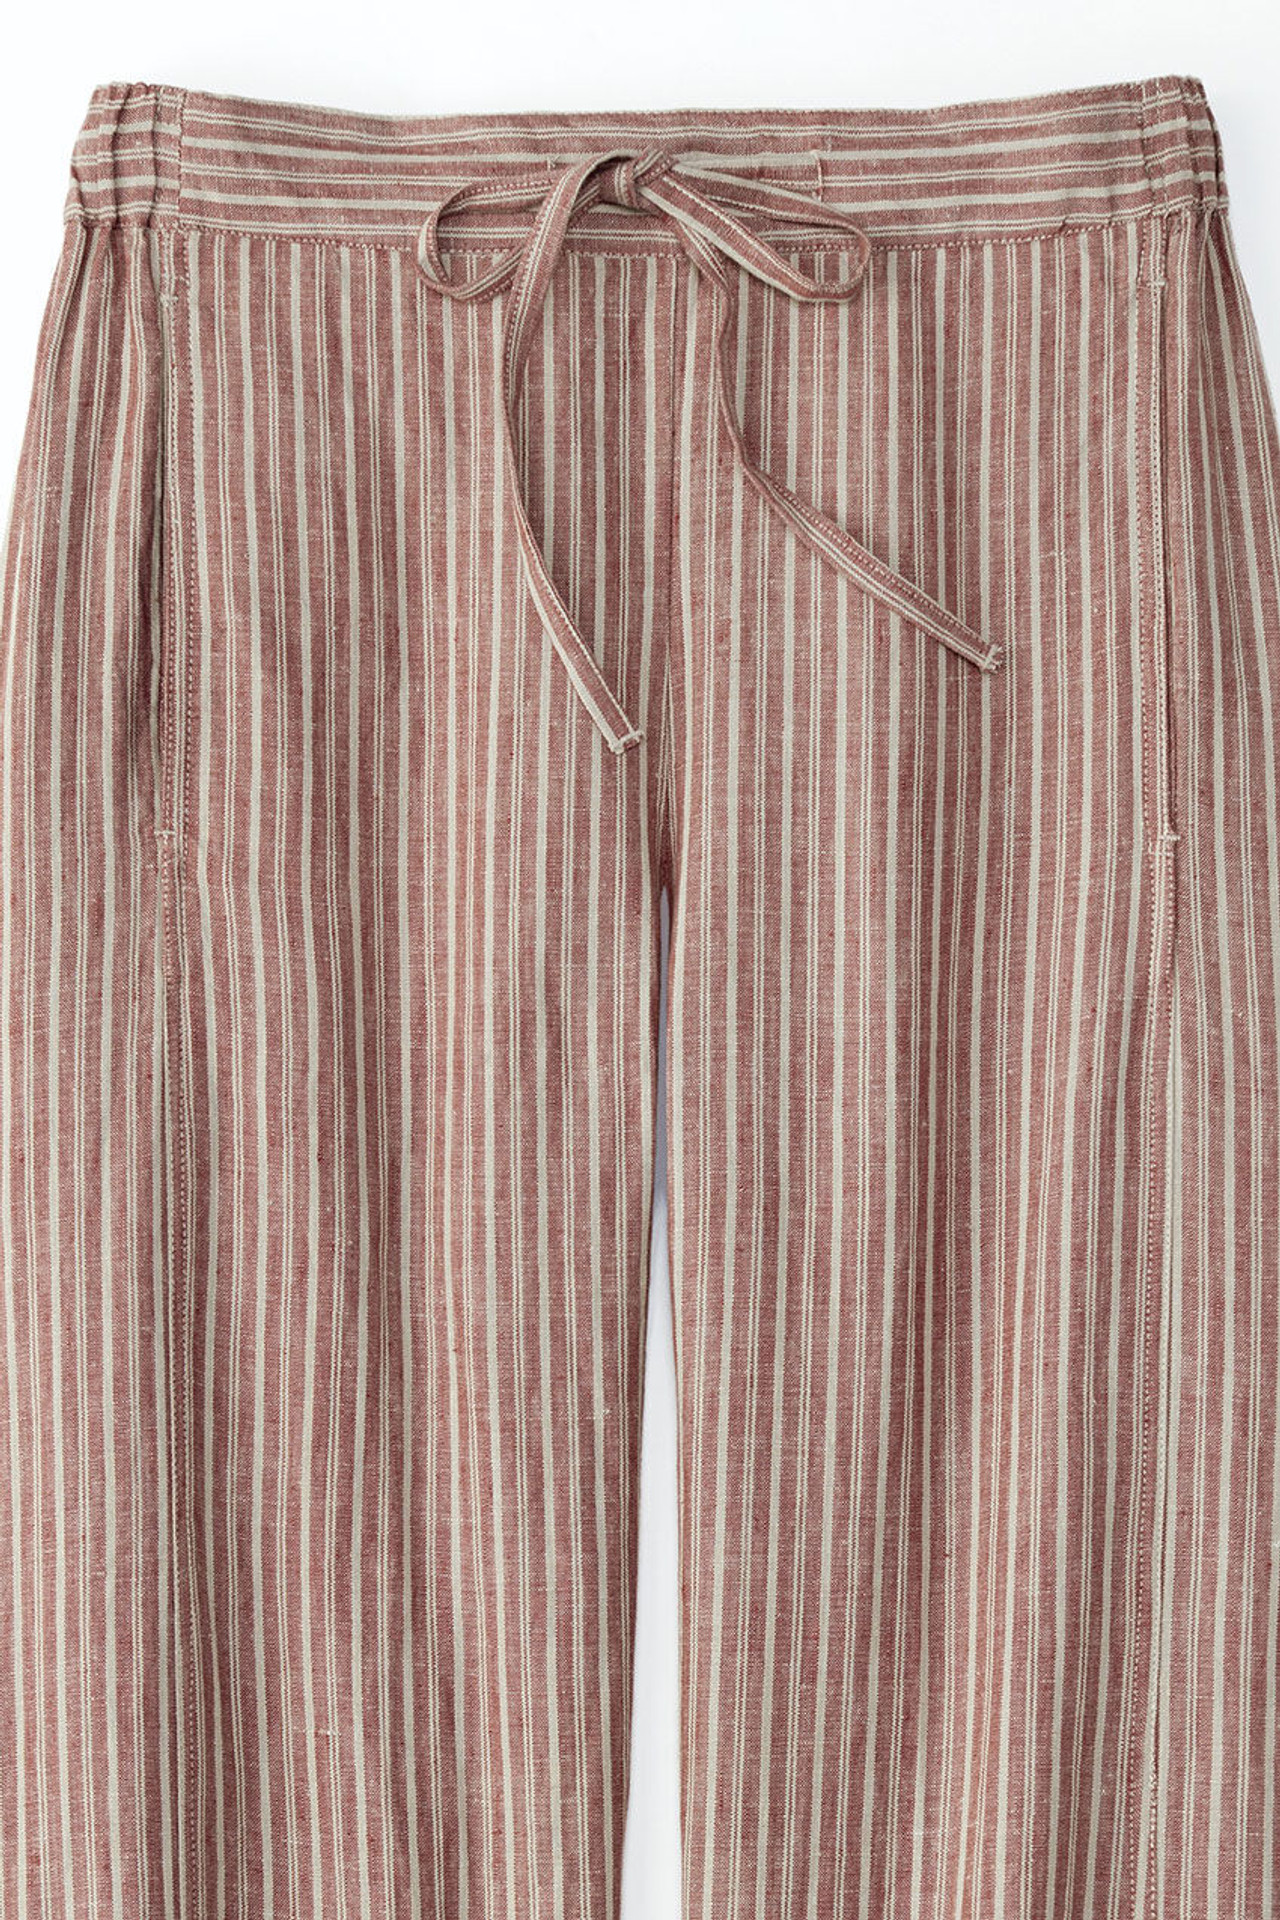 https://cdn11.bigcommerce.com/s-lulfv0vz2b/images/stencil/1280w/products/13021/83206/harmony-stripes-linen-ankle-pant__fig-flax_1__19841__03951.1698305910.jpg?c=1